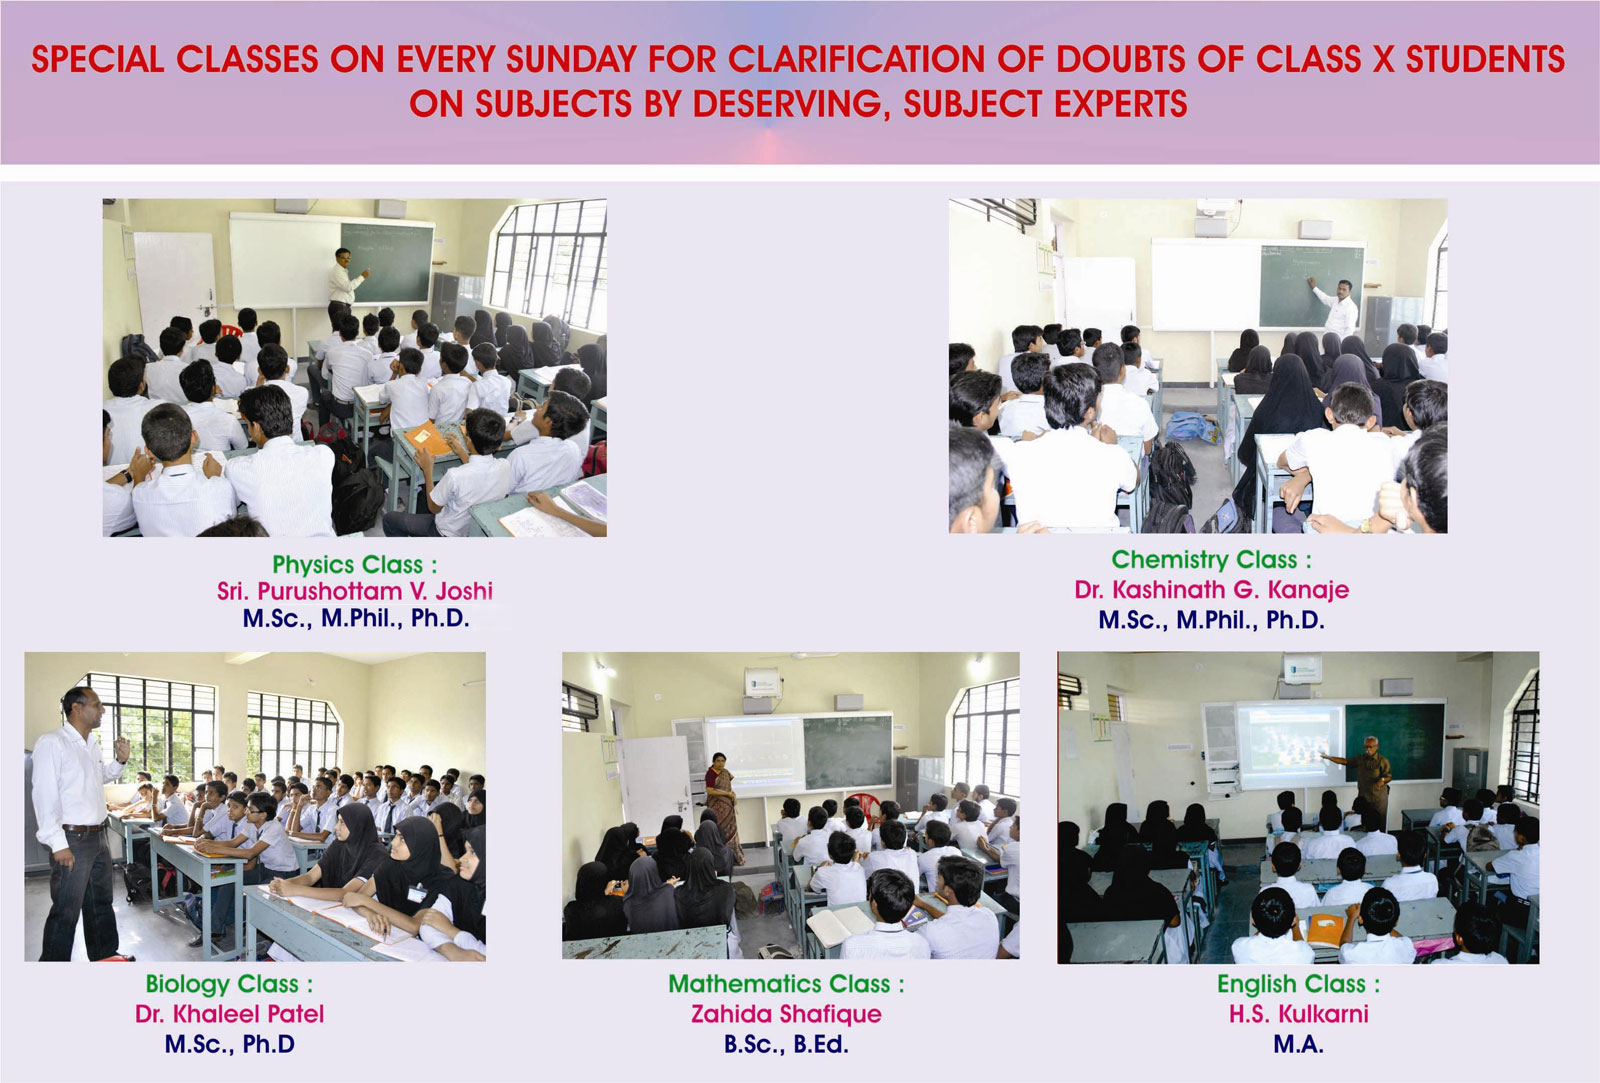 Special classes by Source Persons